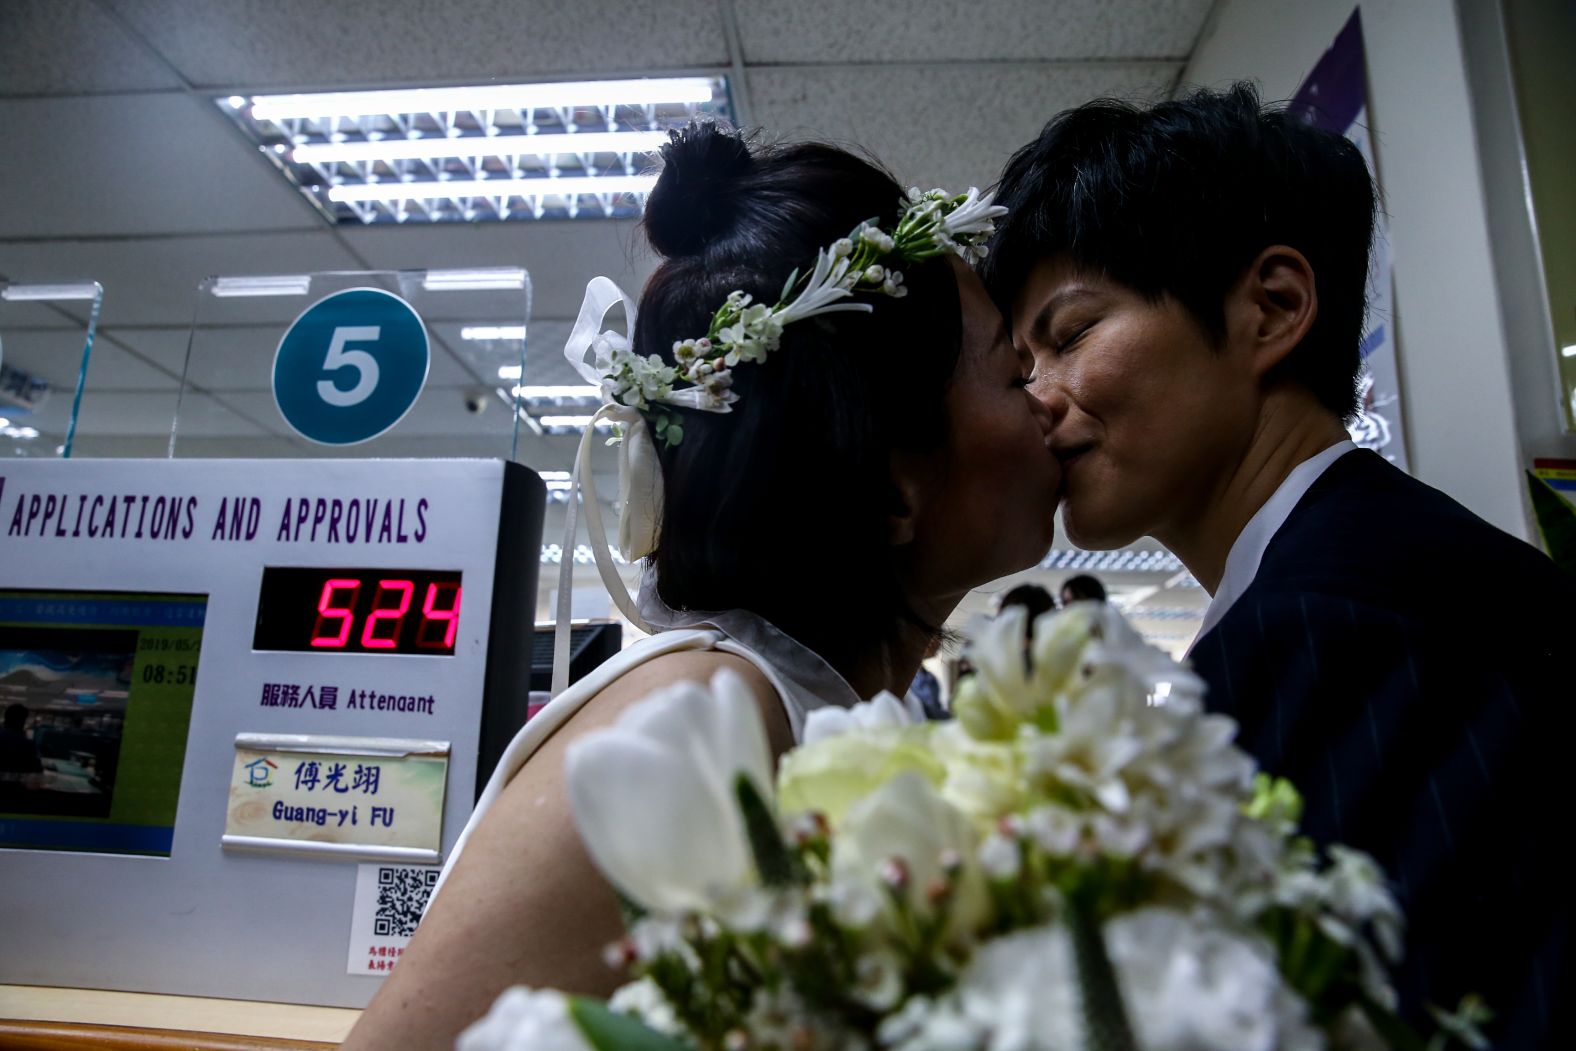 Xue Chen, left, and Antonia Chen, right, kiss after registering their marital status on Friday.